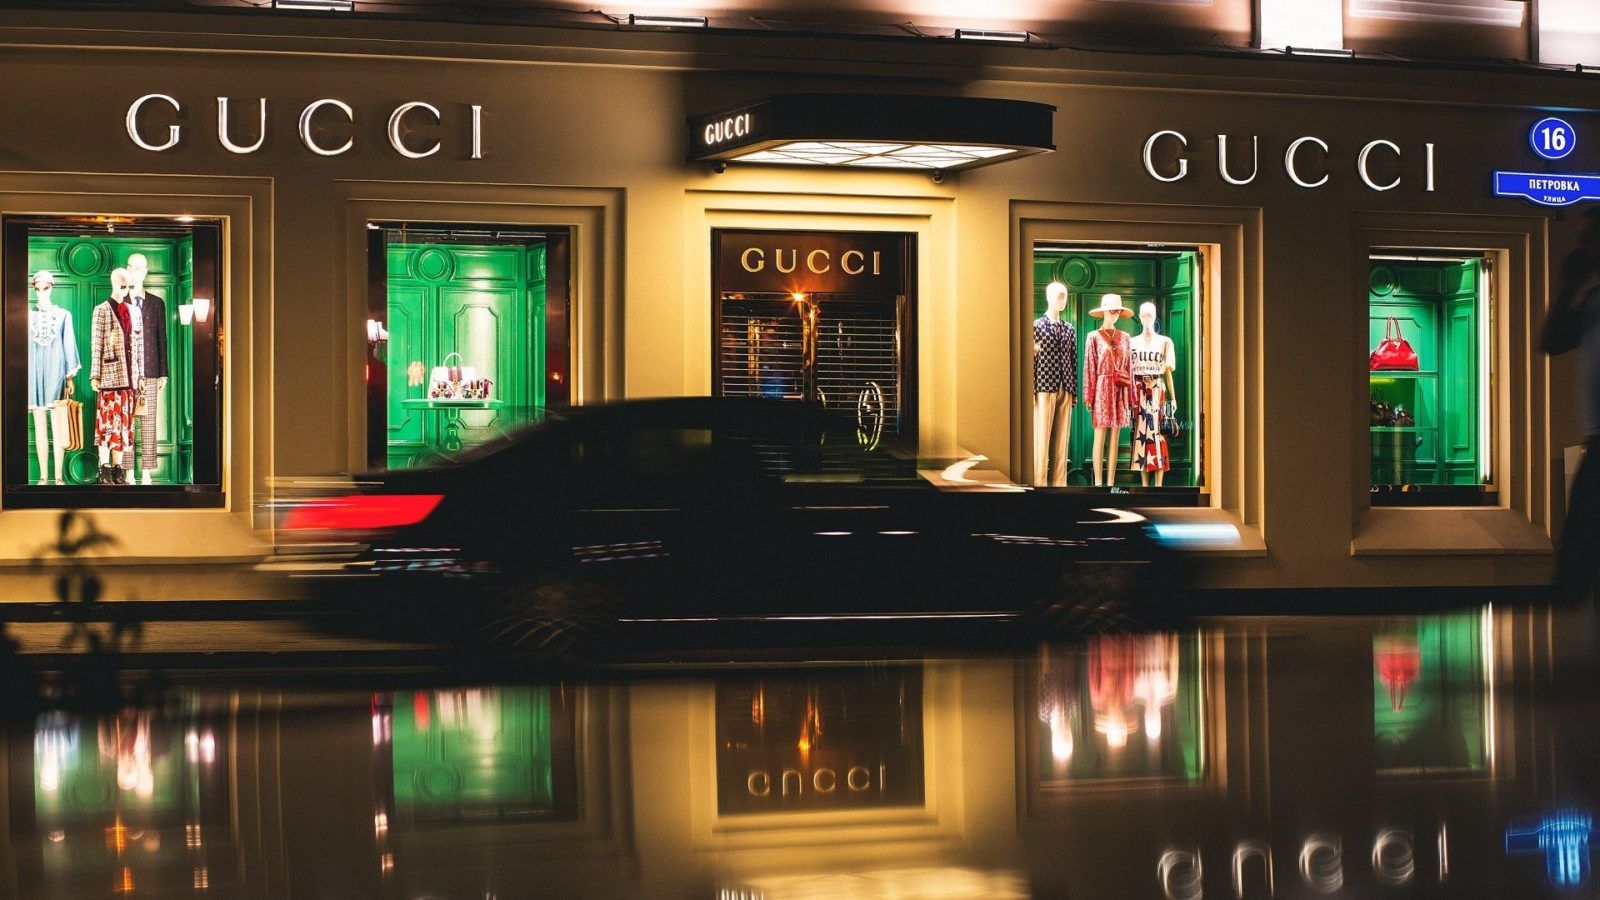 The future is definitely here: Gucci is now accepting payments through crypto